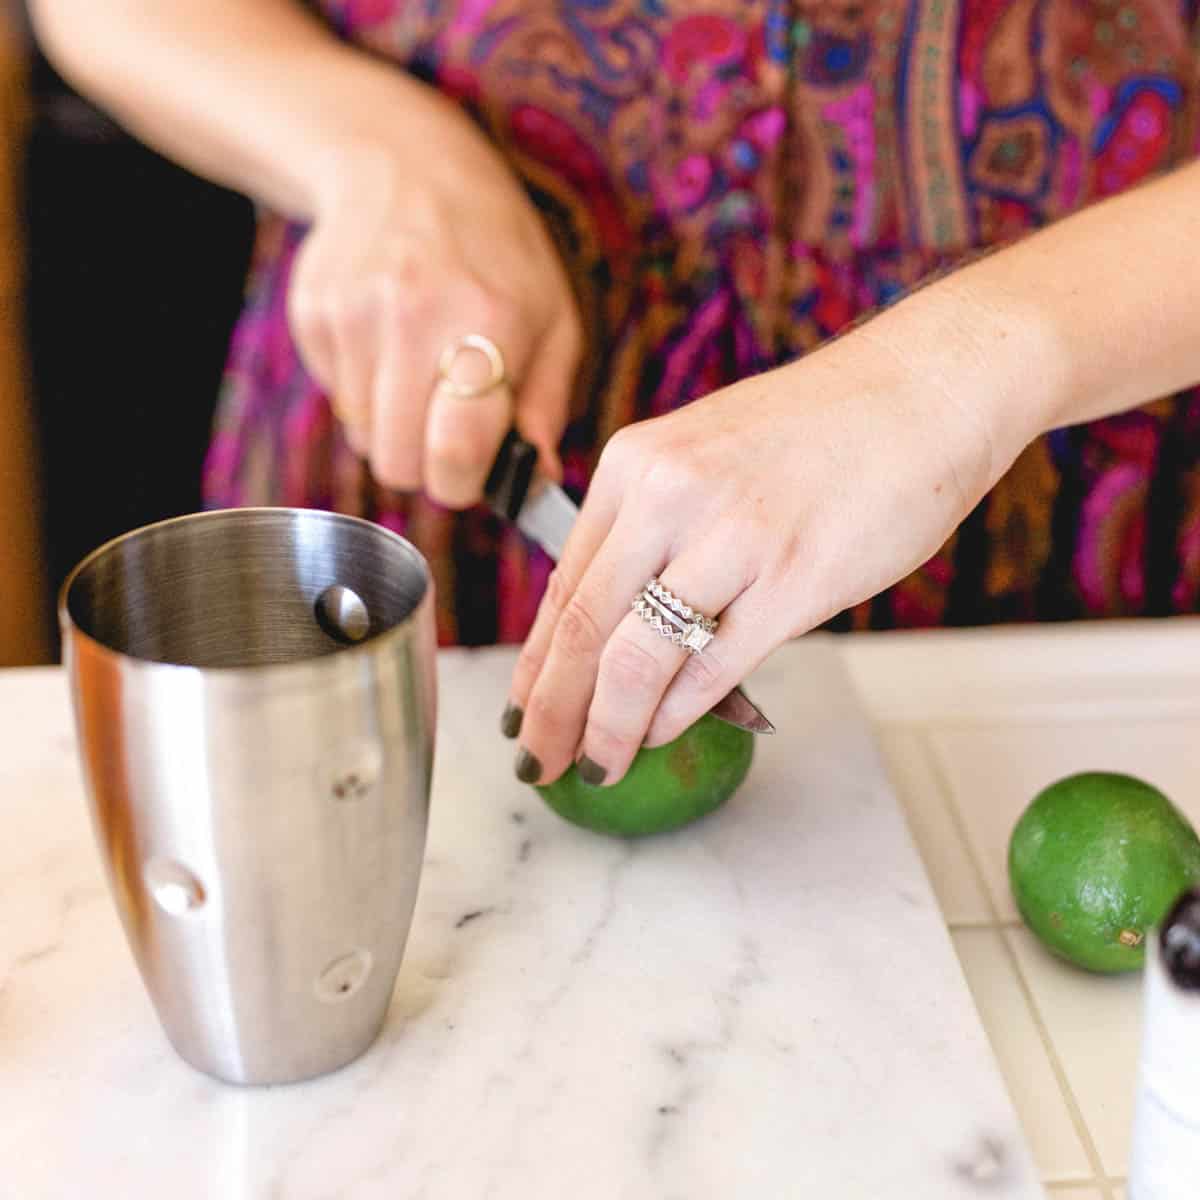 Woman cutting a lime on a counter next to a cocktail shaker.